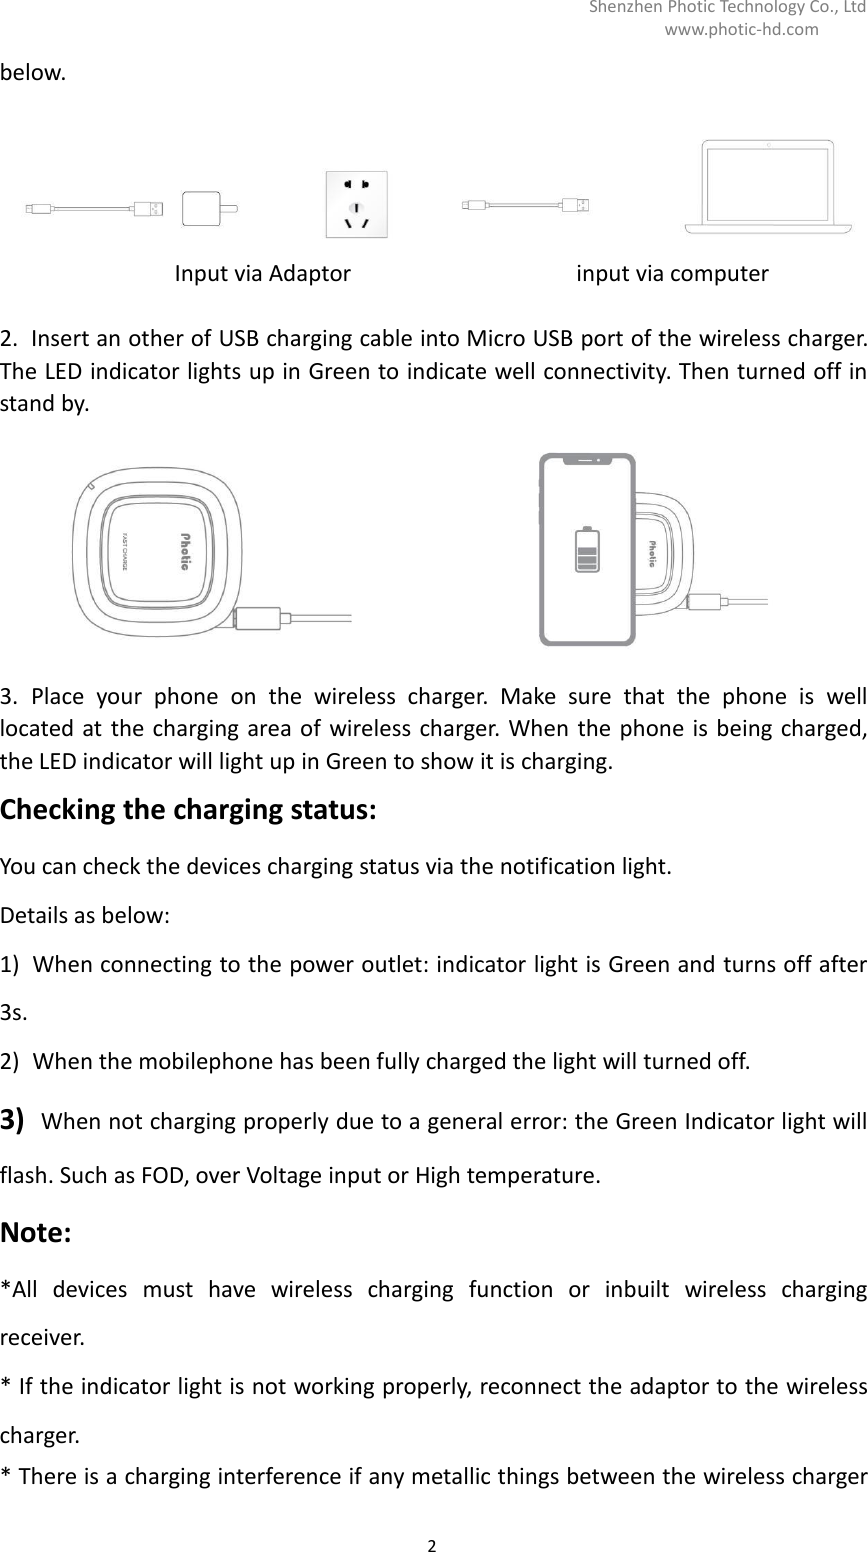 Shenzhen Photic Technology Co., Ltdwww.photic-hd.com2below.Input via Adaptor input via computer2. Insert an other of USB charging cable into Micro USB port of the wireless charger.The LED indicator lights up in Green to indicate well connectivity. Then turned off instand by.3. Place your phone on the wireless charger. Make sure that the phone is welllocated at the charging area of wireless charger. When the phone is being charged,the LED indicator will light up in Green to show it is charging.Checking the charging status:You can check the devices charging status via the notification light.Details as below:1) When connecting to the power outlet: indicator light is Green and turns off after3s.2) When the mobilephone has been fully charged the light will turned off.3) When not charging properly due to a general error: the Green Indicator light willflash. Such as FOD, over Voltage input or High temperature.Note:*All devices must have wireless charging function or inbuilt wireless chargingreceiver.* If the indicator light is not working properly, reconnect the adaptor to the wirelesscharger.* There is a charging interference if any metallic things between the wireless charger